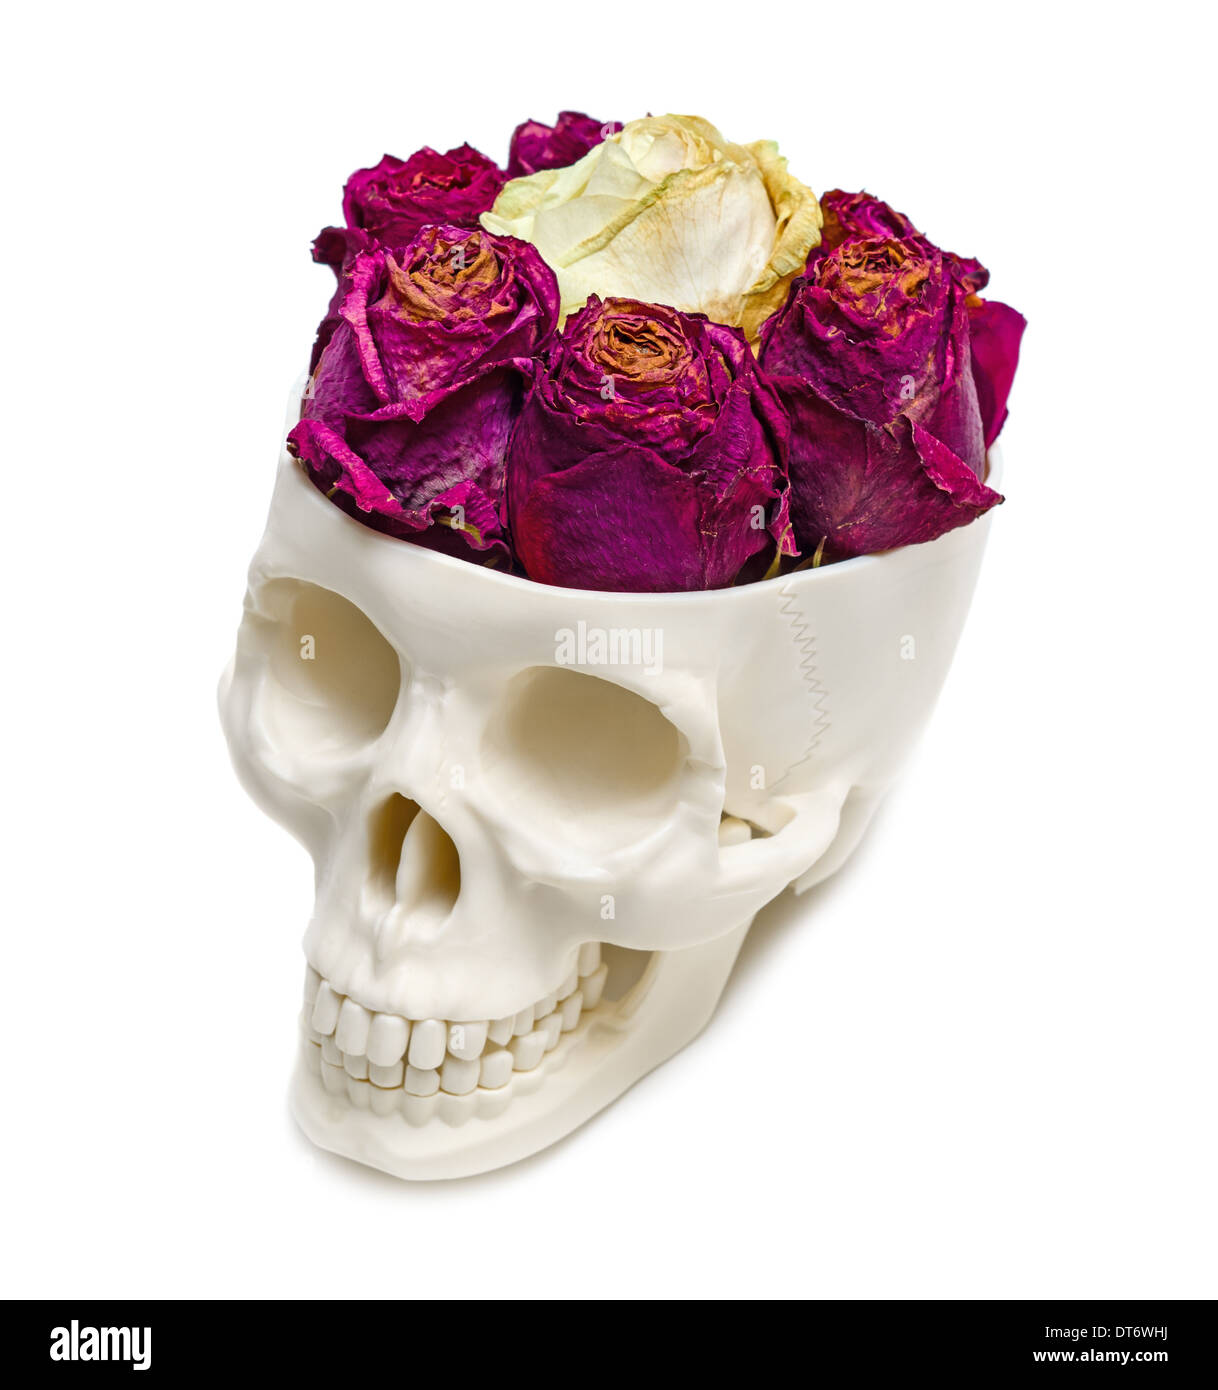 Roses into an human skull isolated on white background. Stock Photo